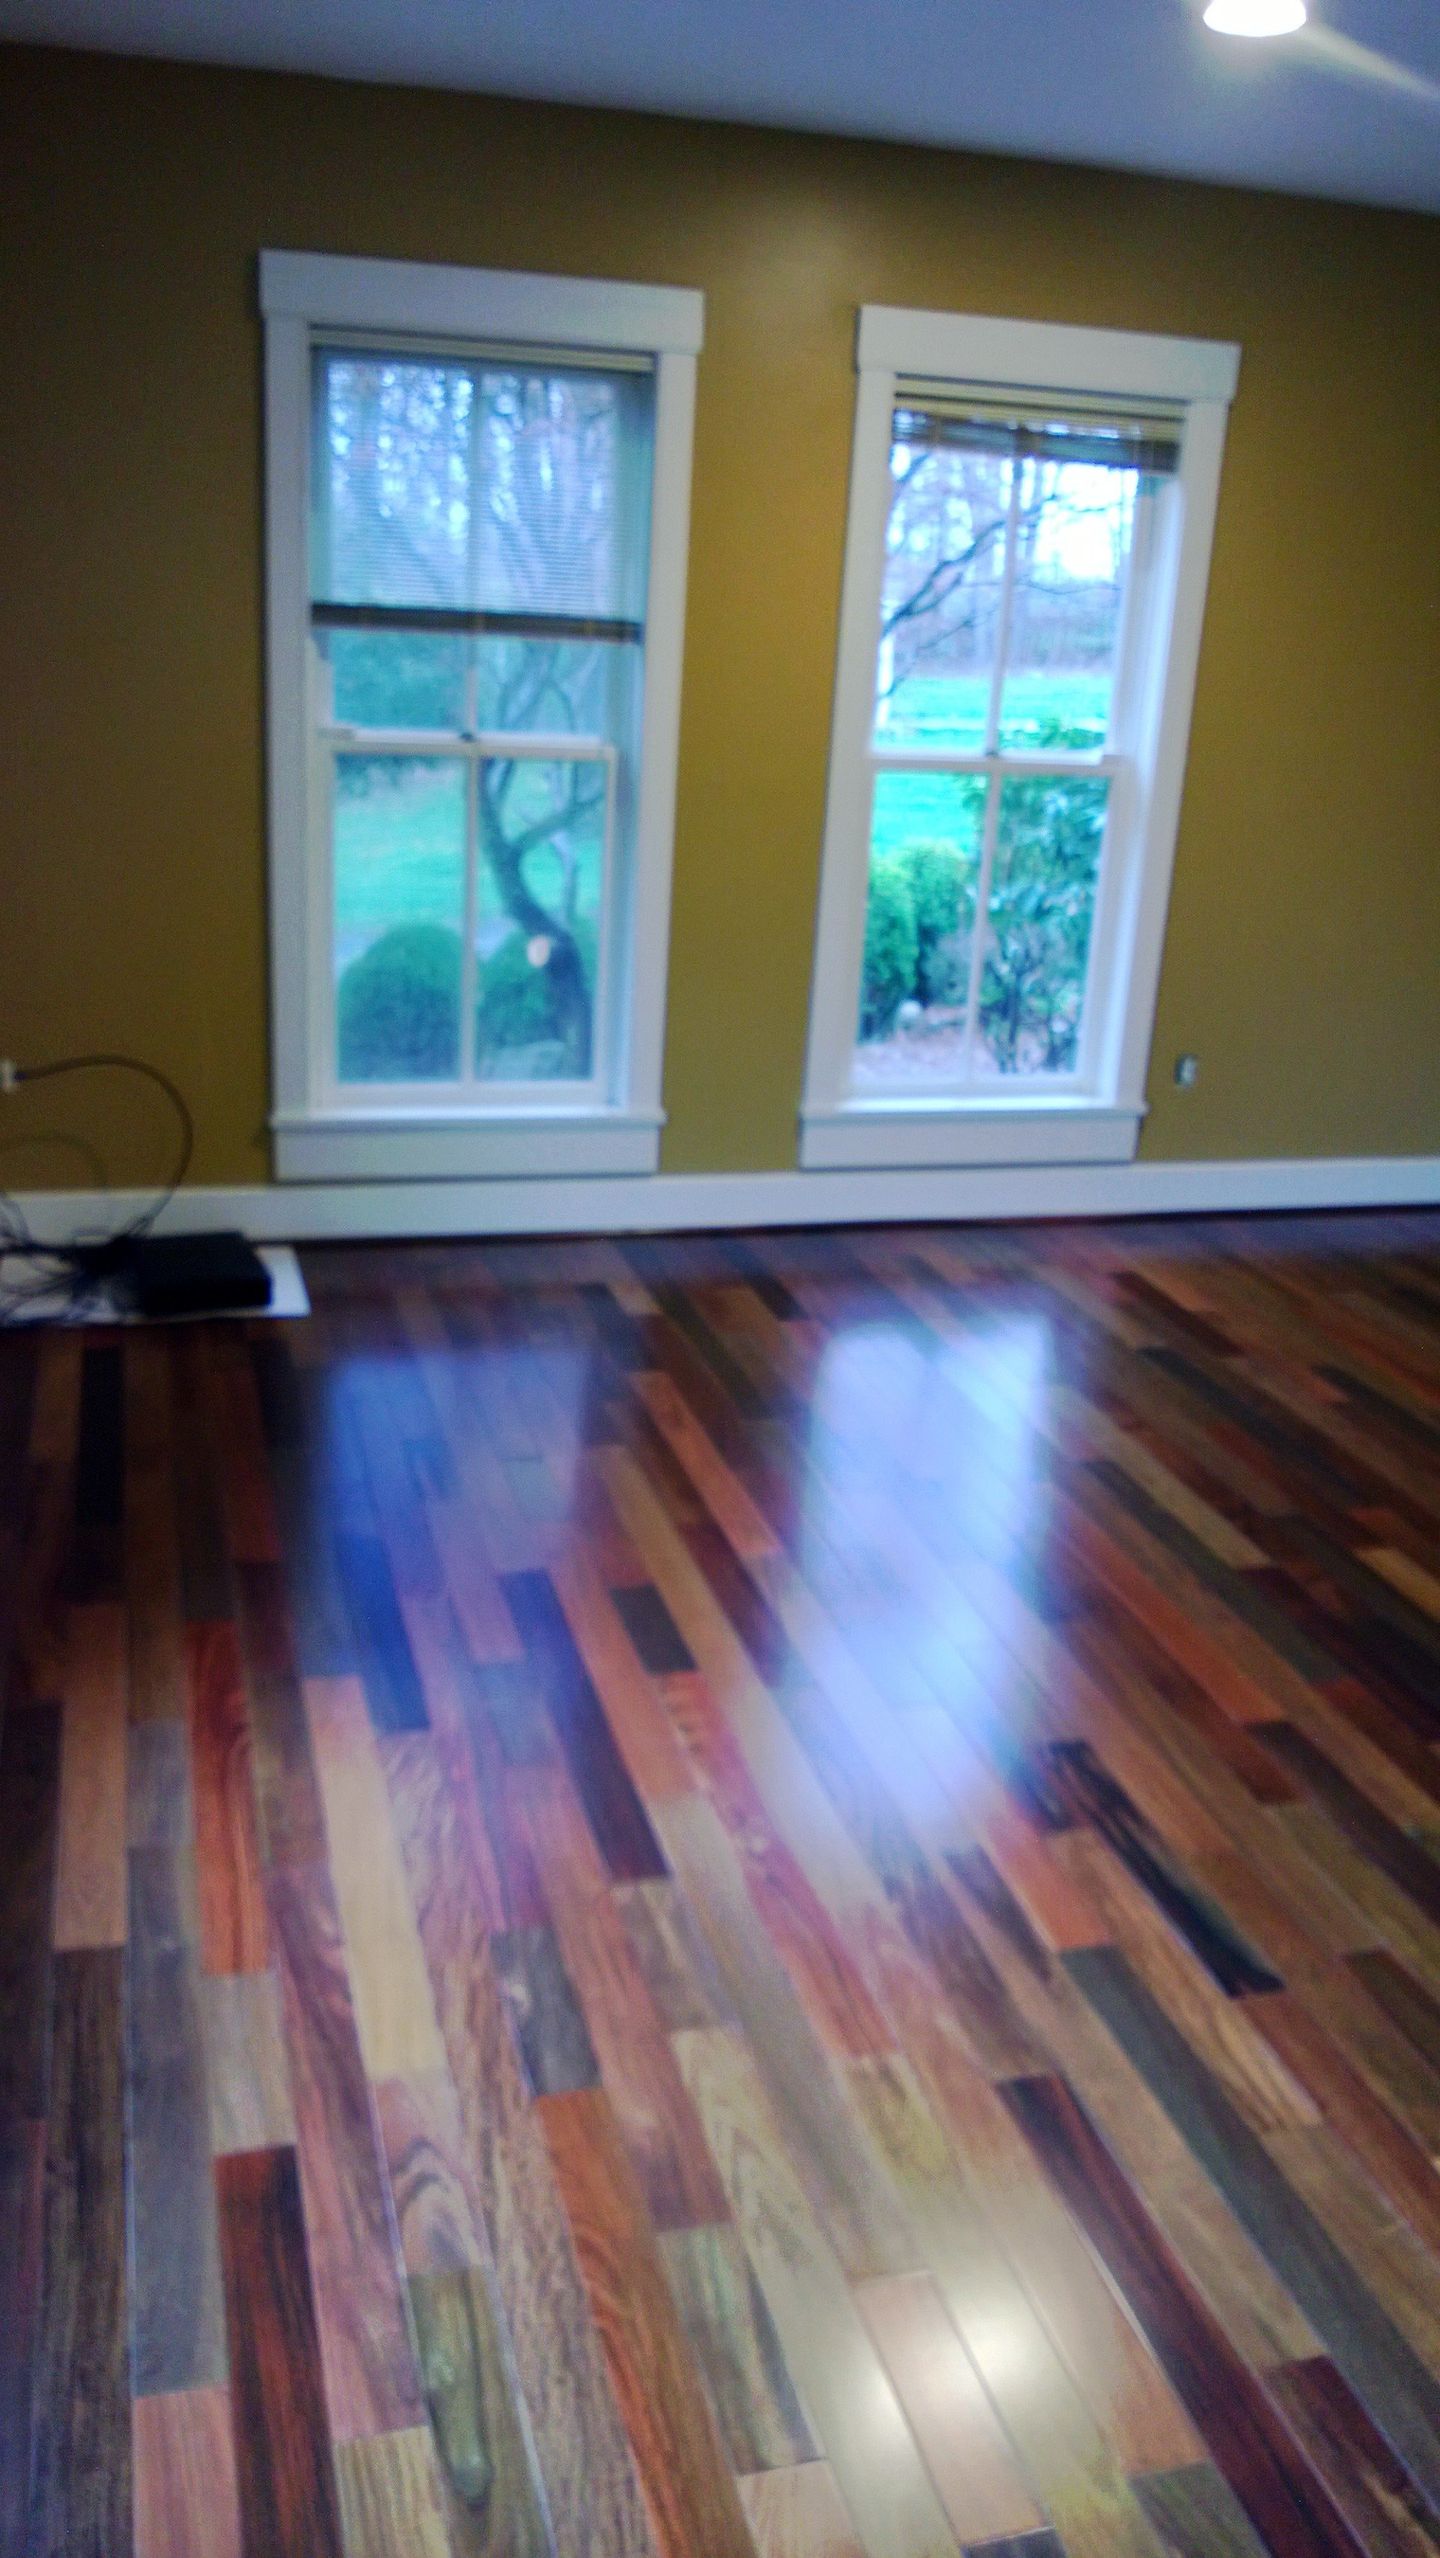 Interior hardwood Floors - Home improvement services in Slippery Rock, PA